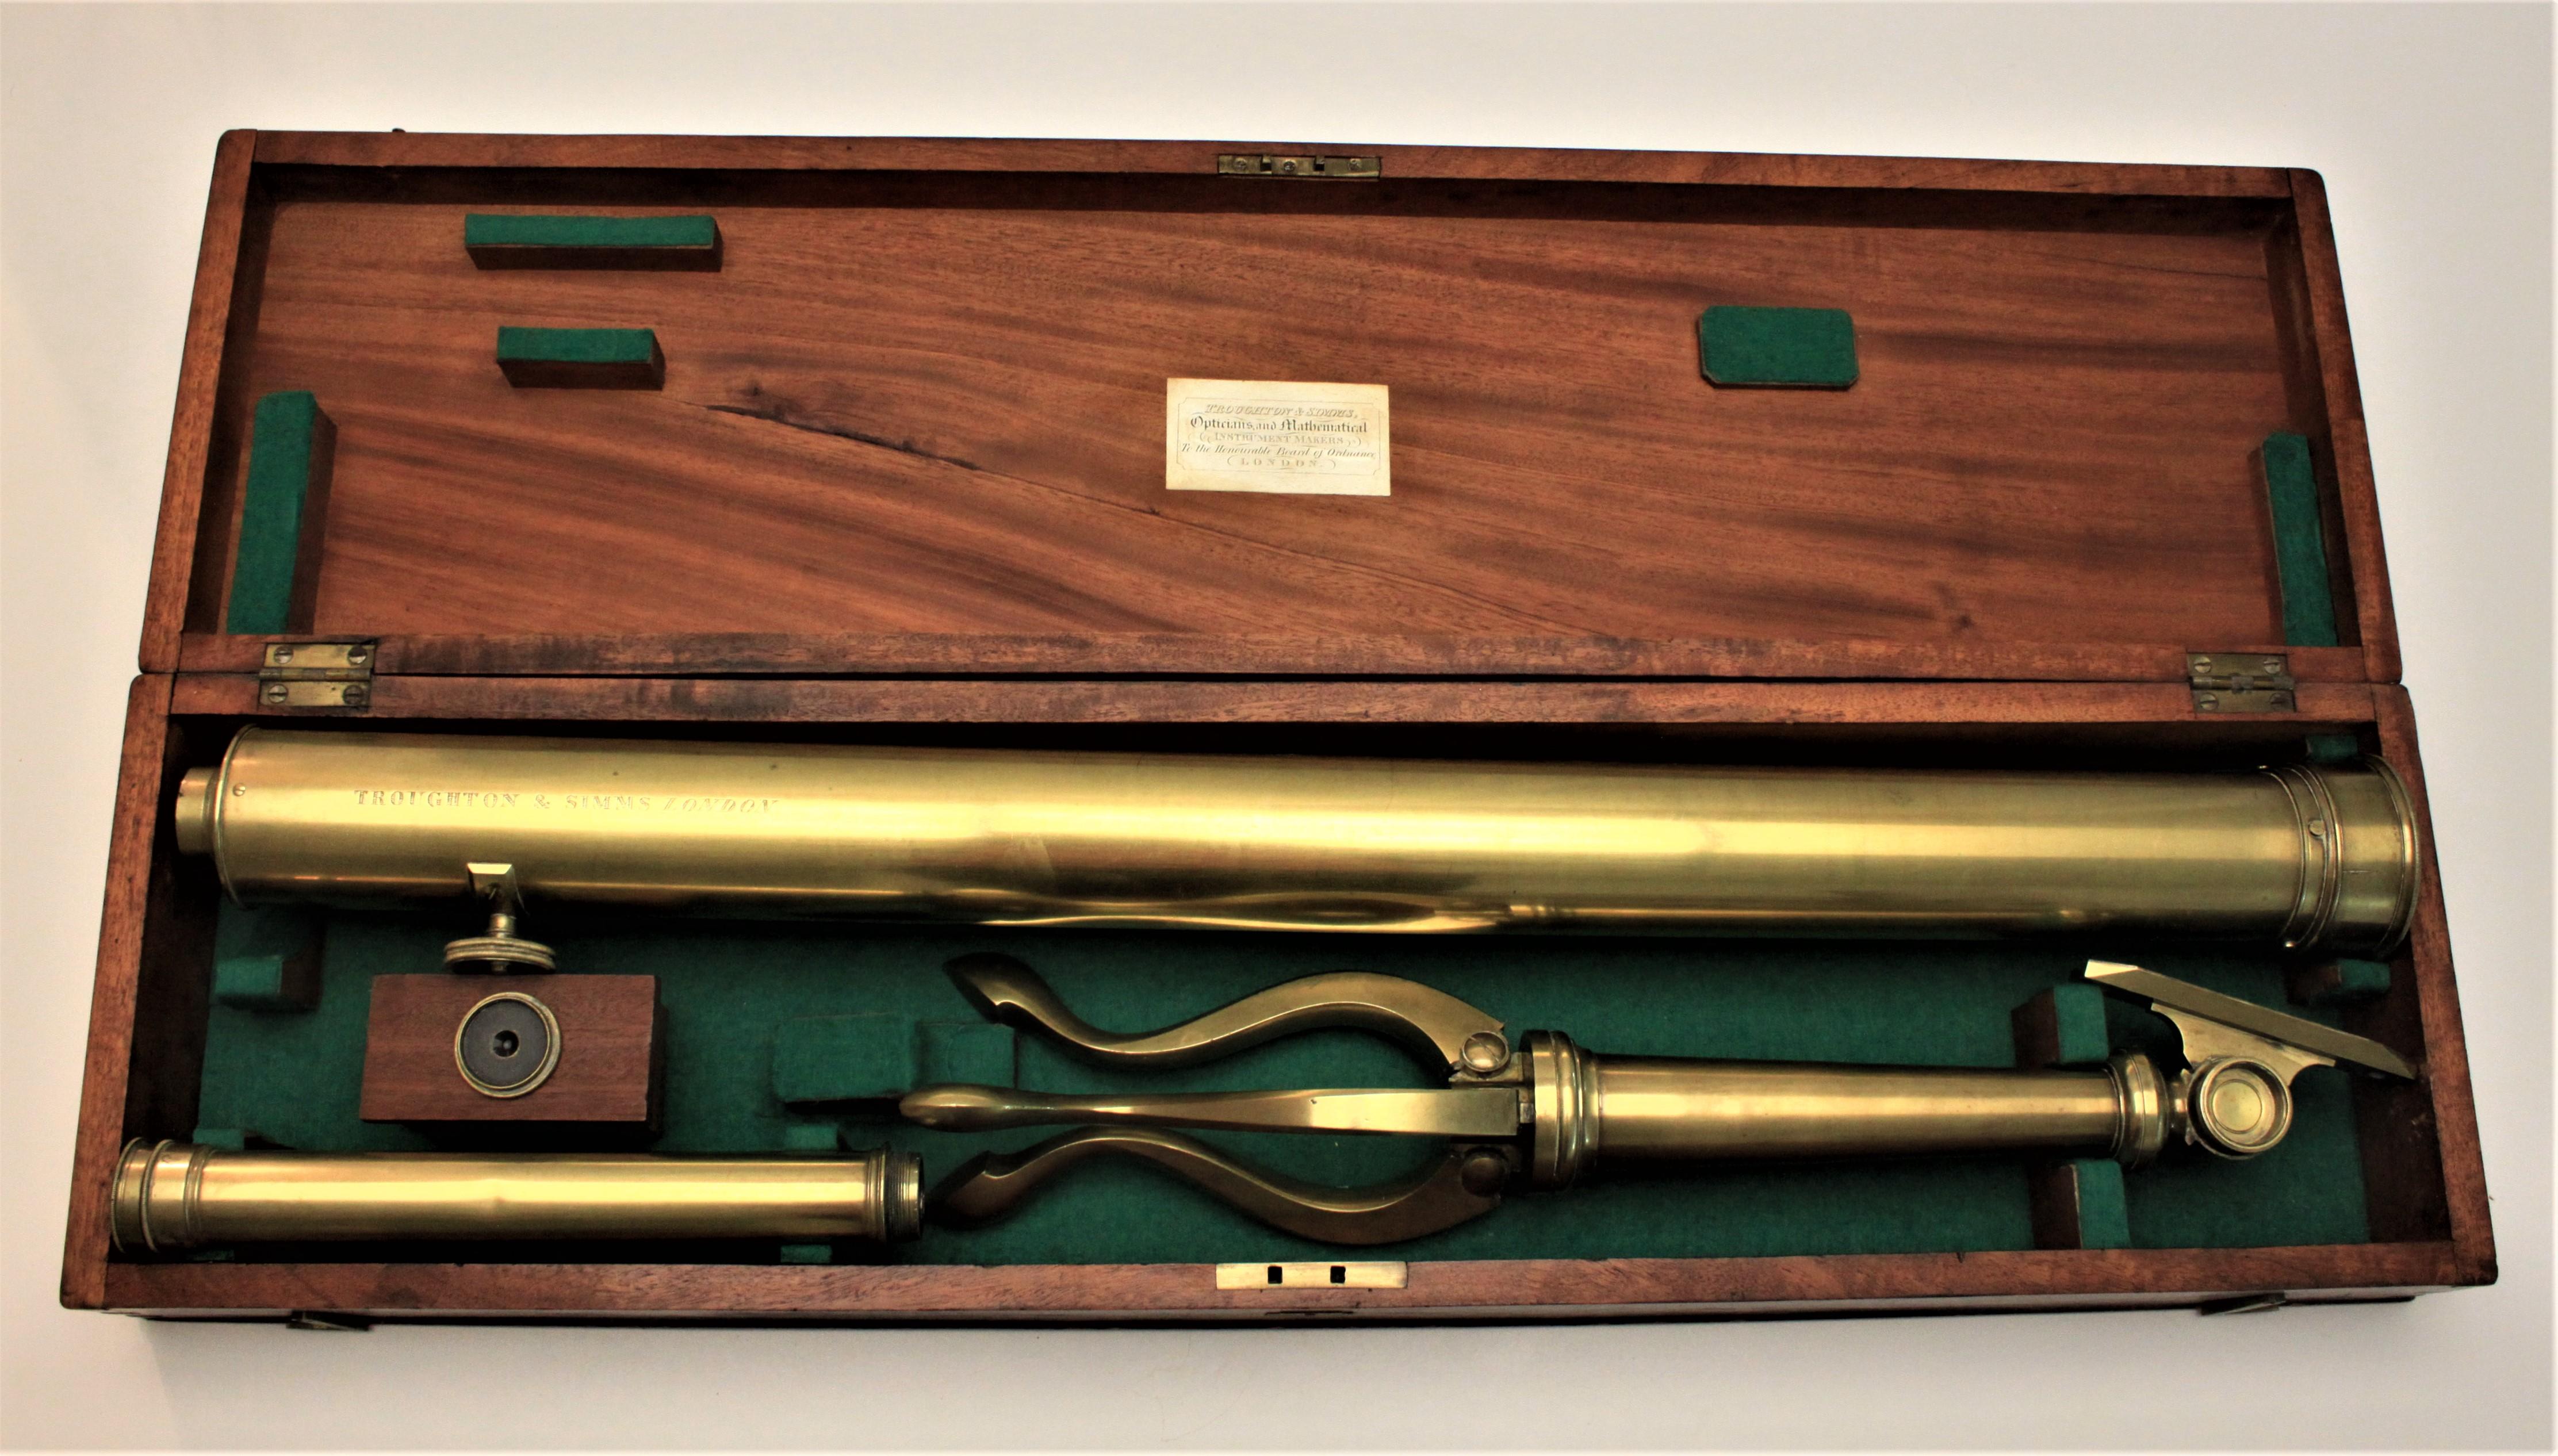 Made in London, England by the noted scientific instrument maker Troughton & Simms, this brass astrological telescope comes complete with its solid brass tripod and one additional eye piece, in addition to its original fitted wooden box. The